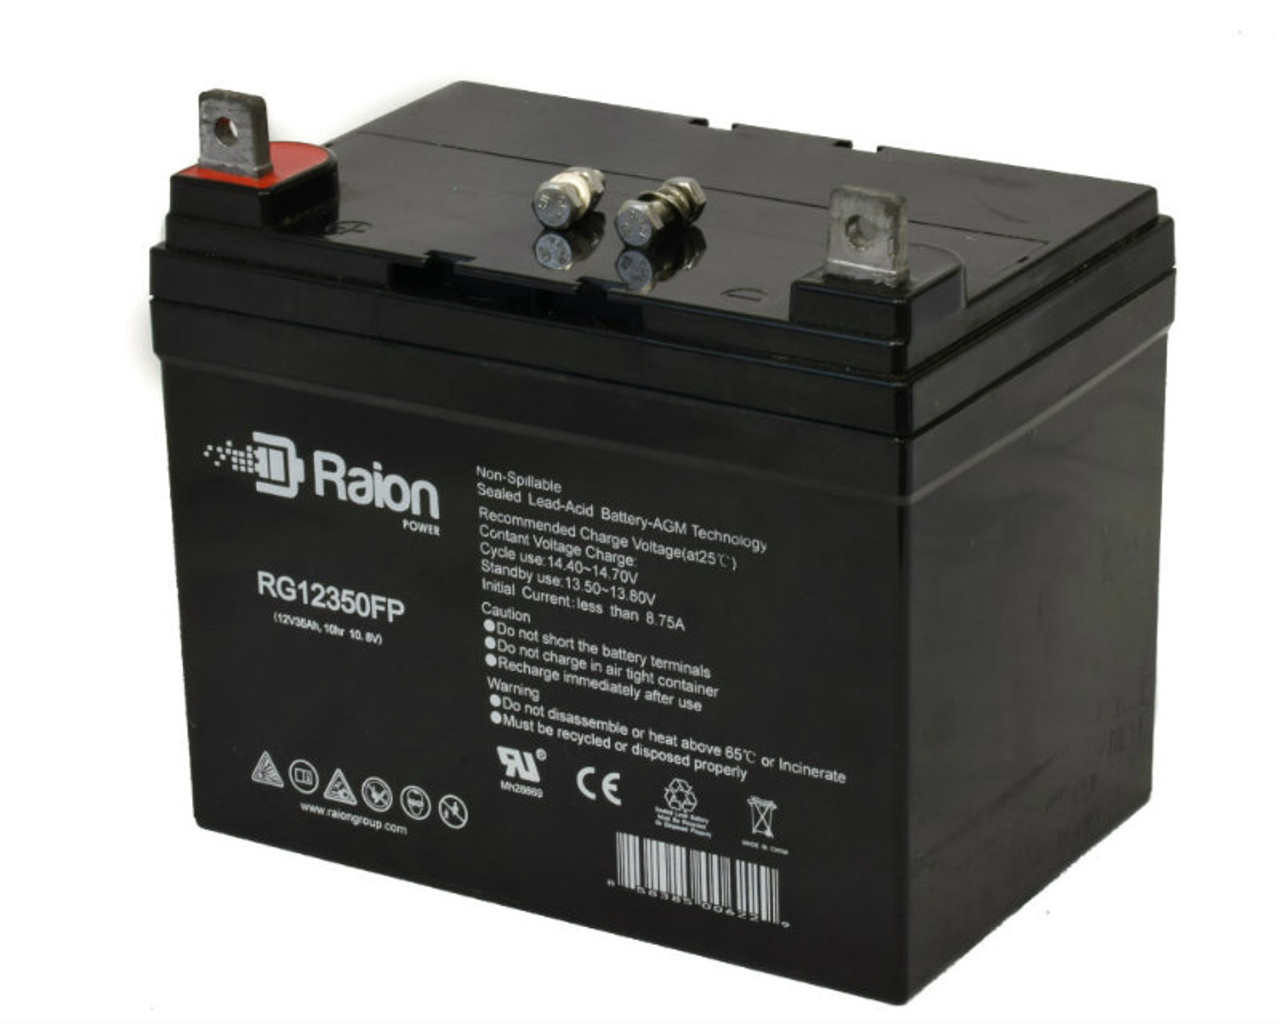 Raion Power Replacement 12V 35Ah RG12350FP Mobility Scooter Battery for Hoveround Affinity